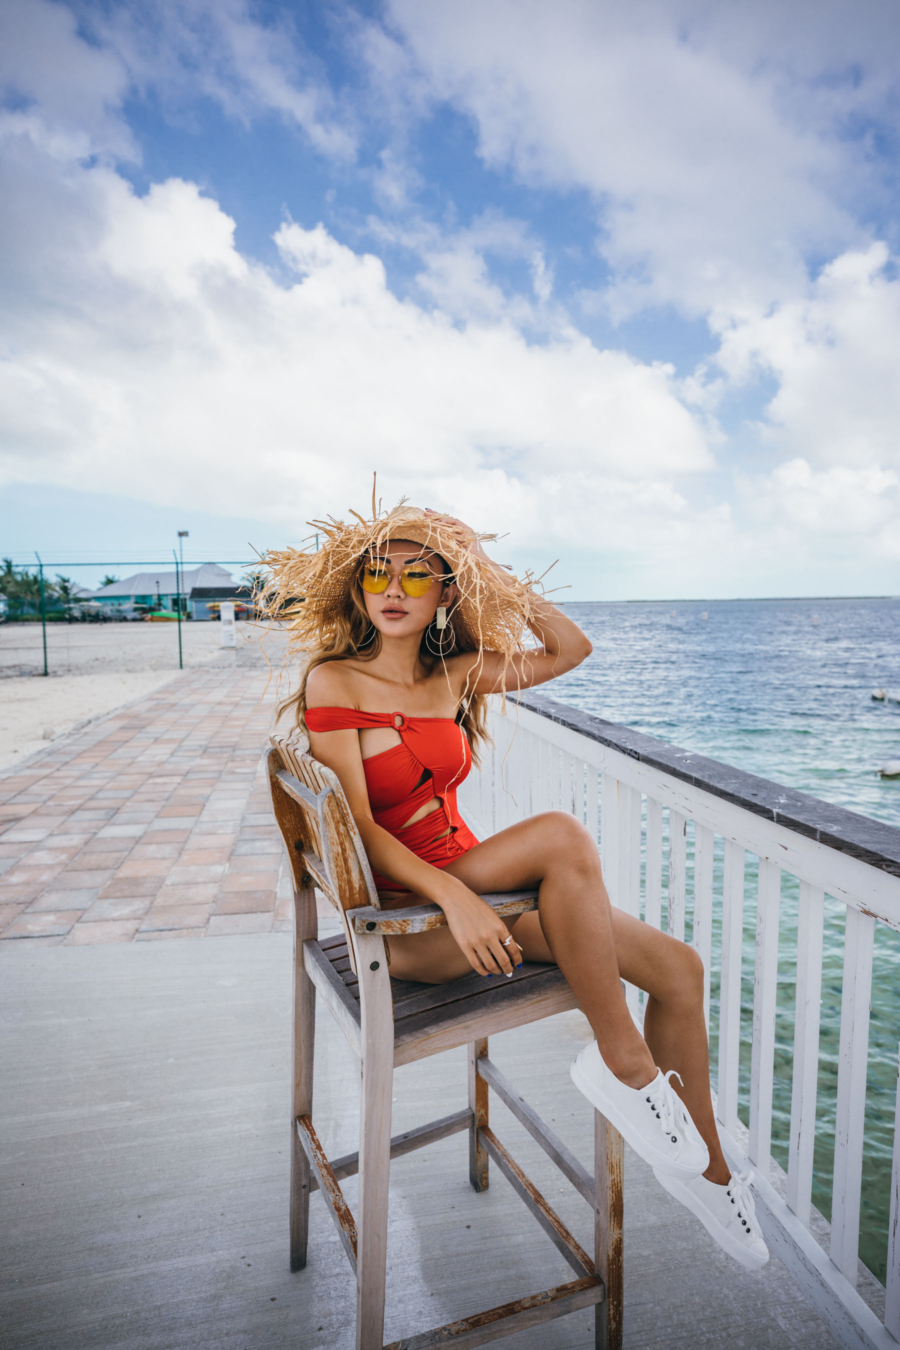 Red One Piece Swimsuit - Reds, Whites, and Blues for Fourth of July Weekend Outfits // NotJessFashion.com